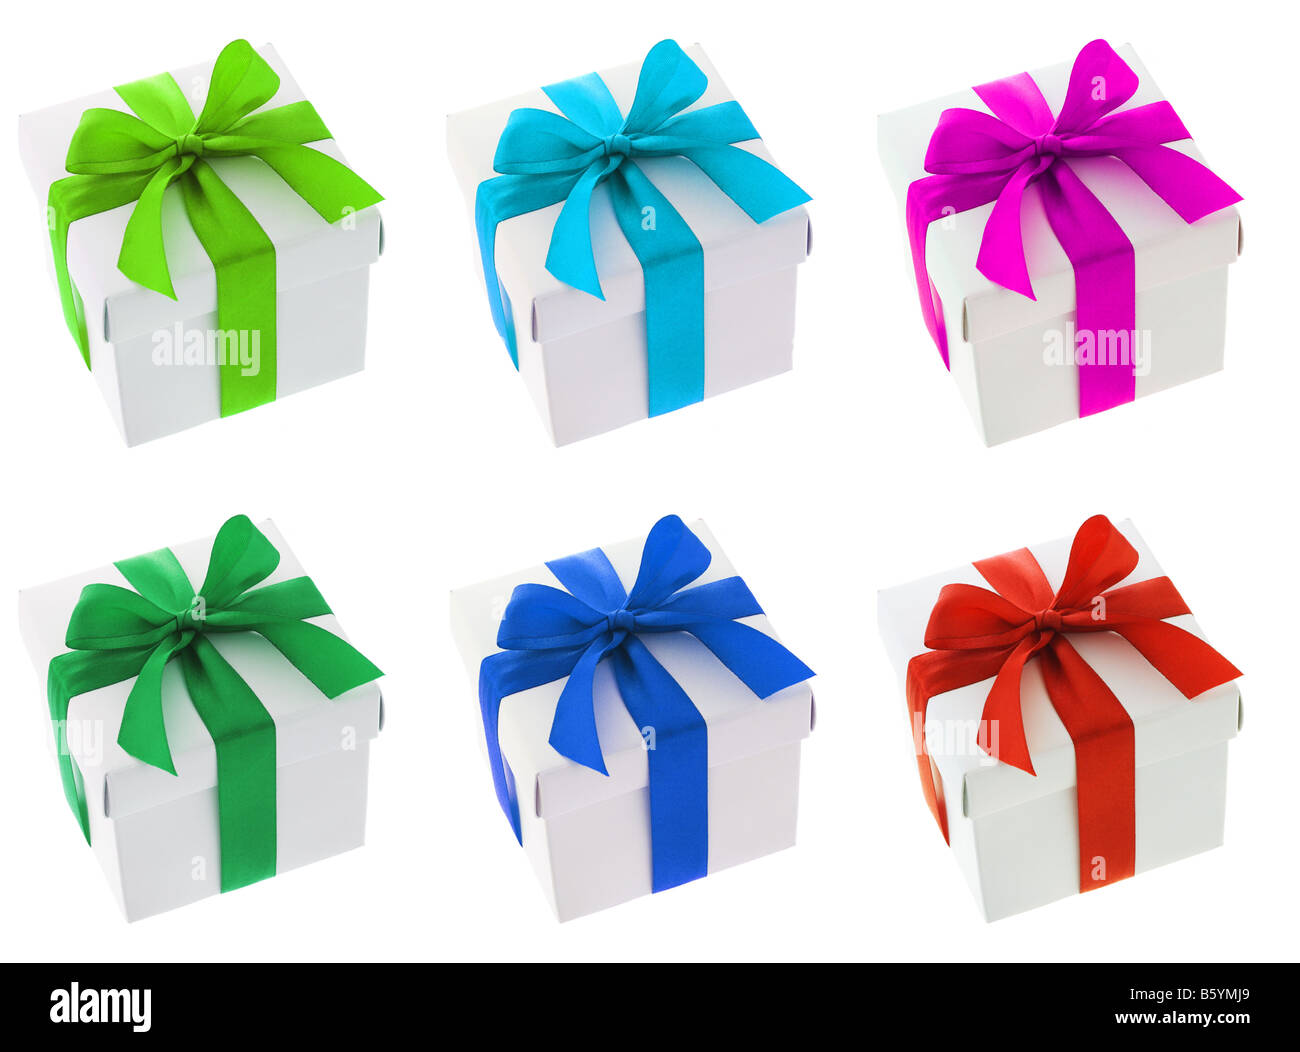 White gift boxes with different color bow ribbons arranged on white background Stock Photo